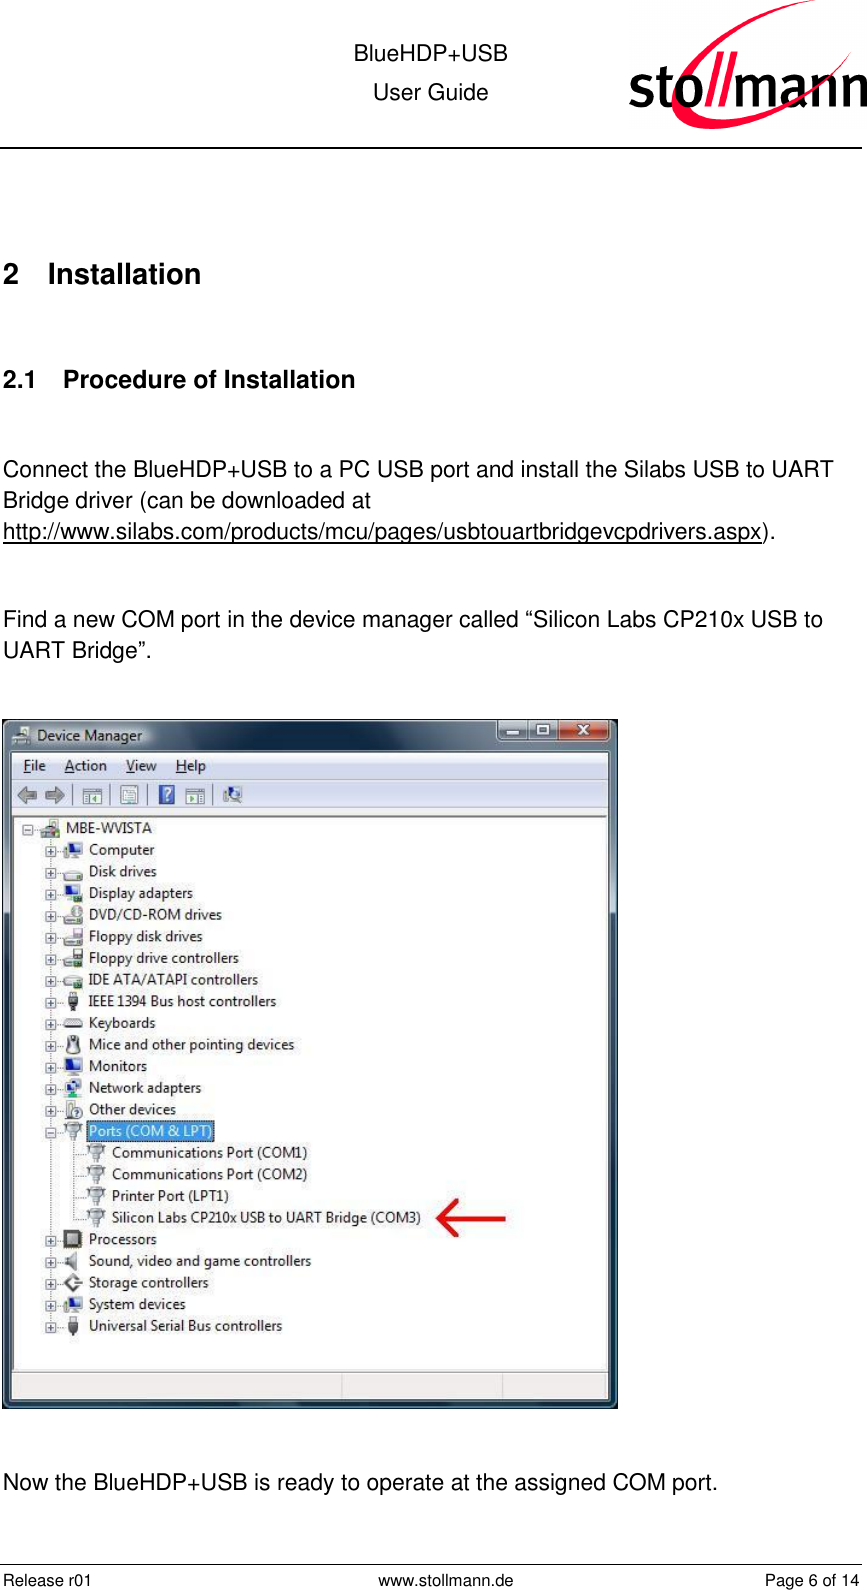  BlueHDP+USB User Guide  Release r01  www.stollmann.de  Page 6 of 14   2  Installation  2.1  Procedure of Installation  Connect the BlueHDP+USB to a PC USB port and install the Silabs USB to UART Bridge driver (can be downloaded at http://www.silabs.com/products/mcu/pages/usbtouartbridgevcpdrivers.aspx).  Find a new COM port in the device manager called “Silicon Labs CP210x USB to UART Bridge”.    Now the BlueHDP+USB is ready to operate at the assigned COM port. 